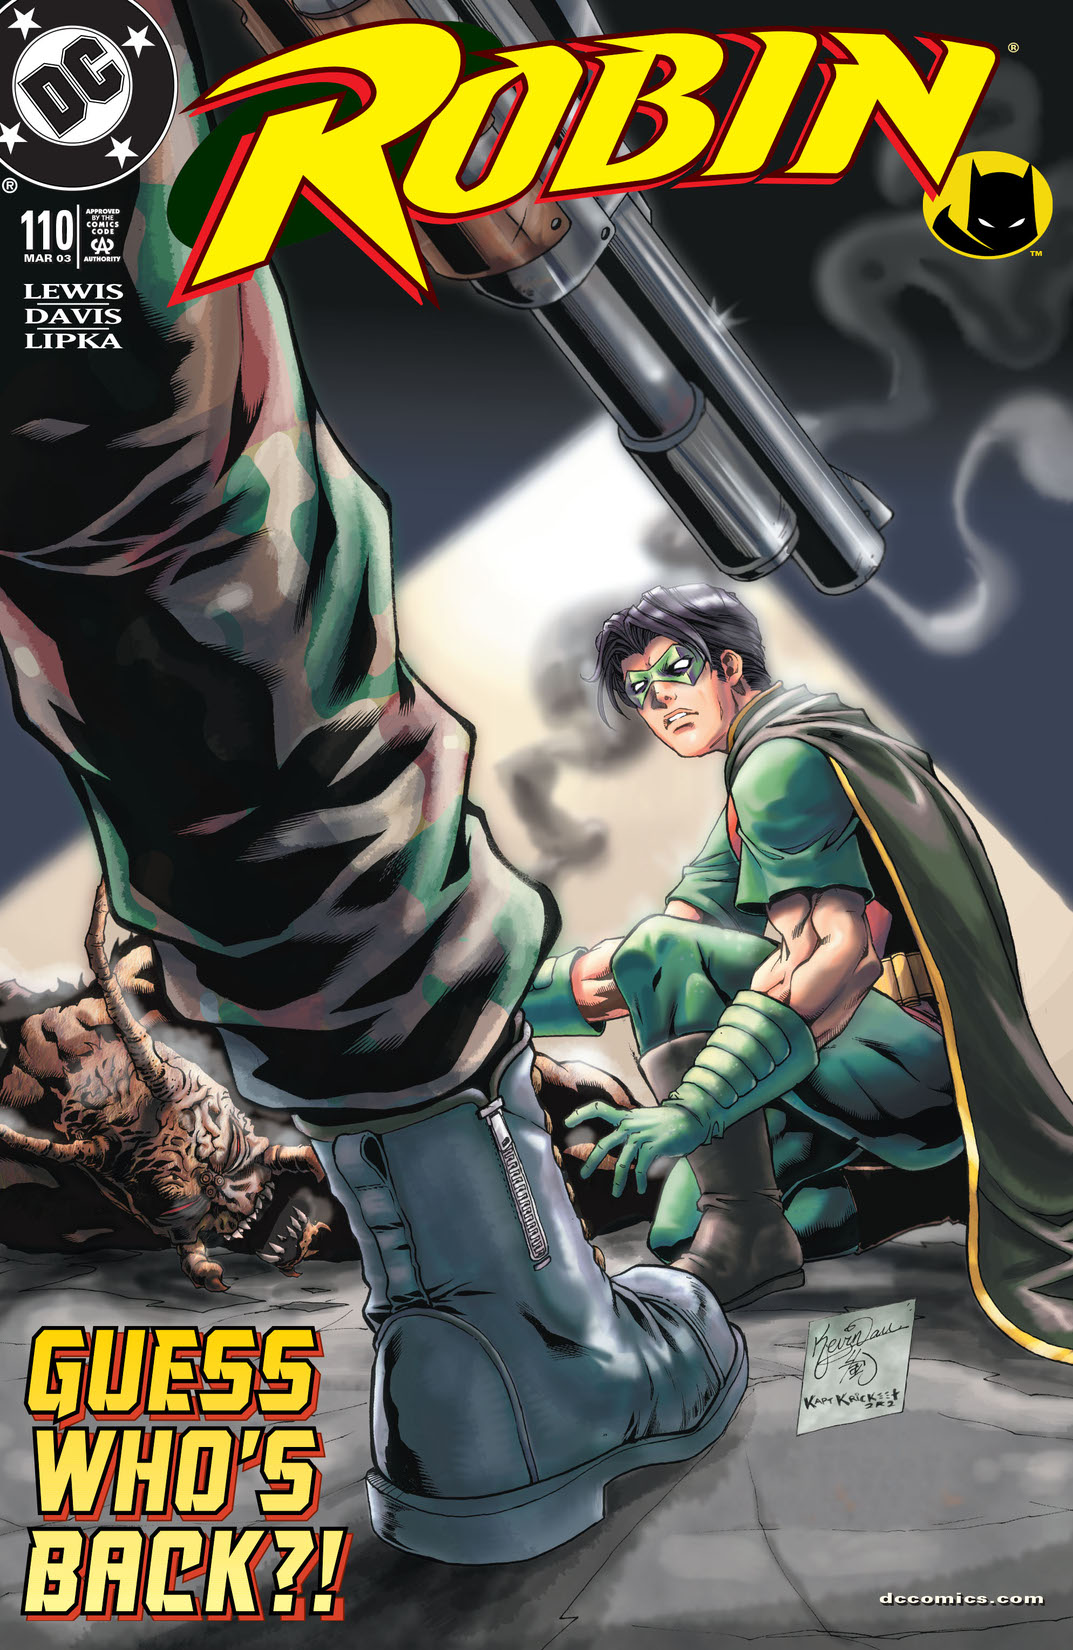 Robin (1993-) #110 preview images